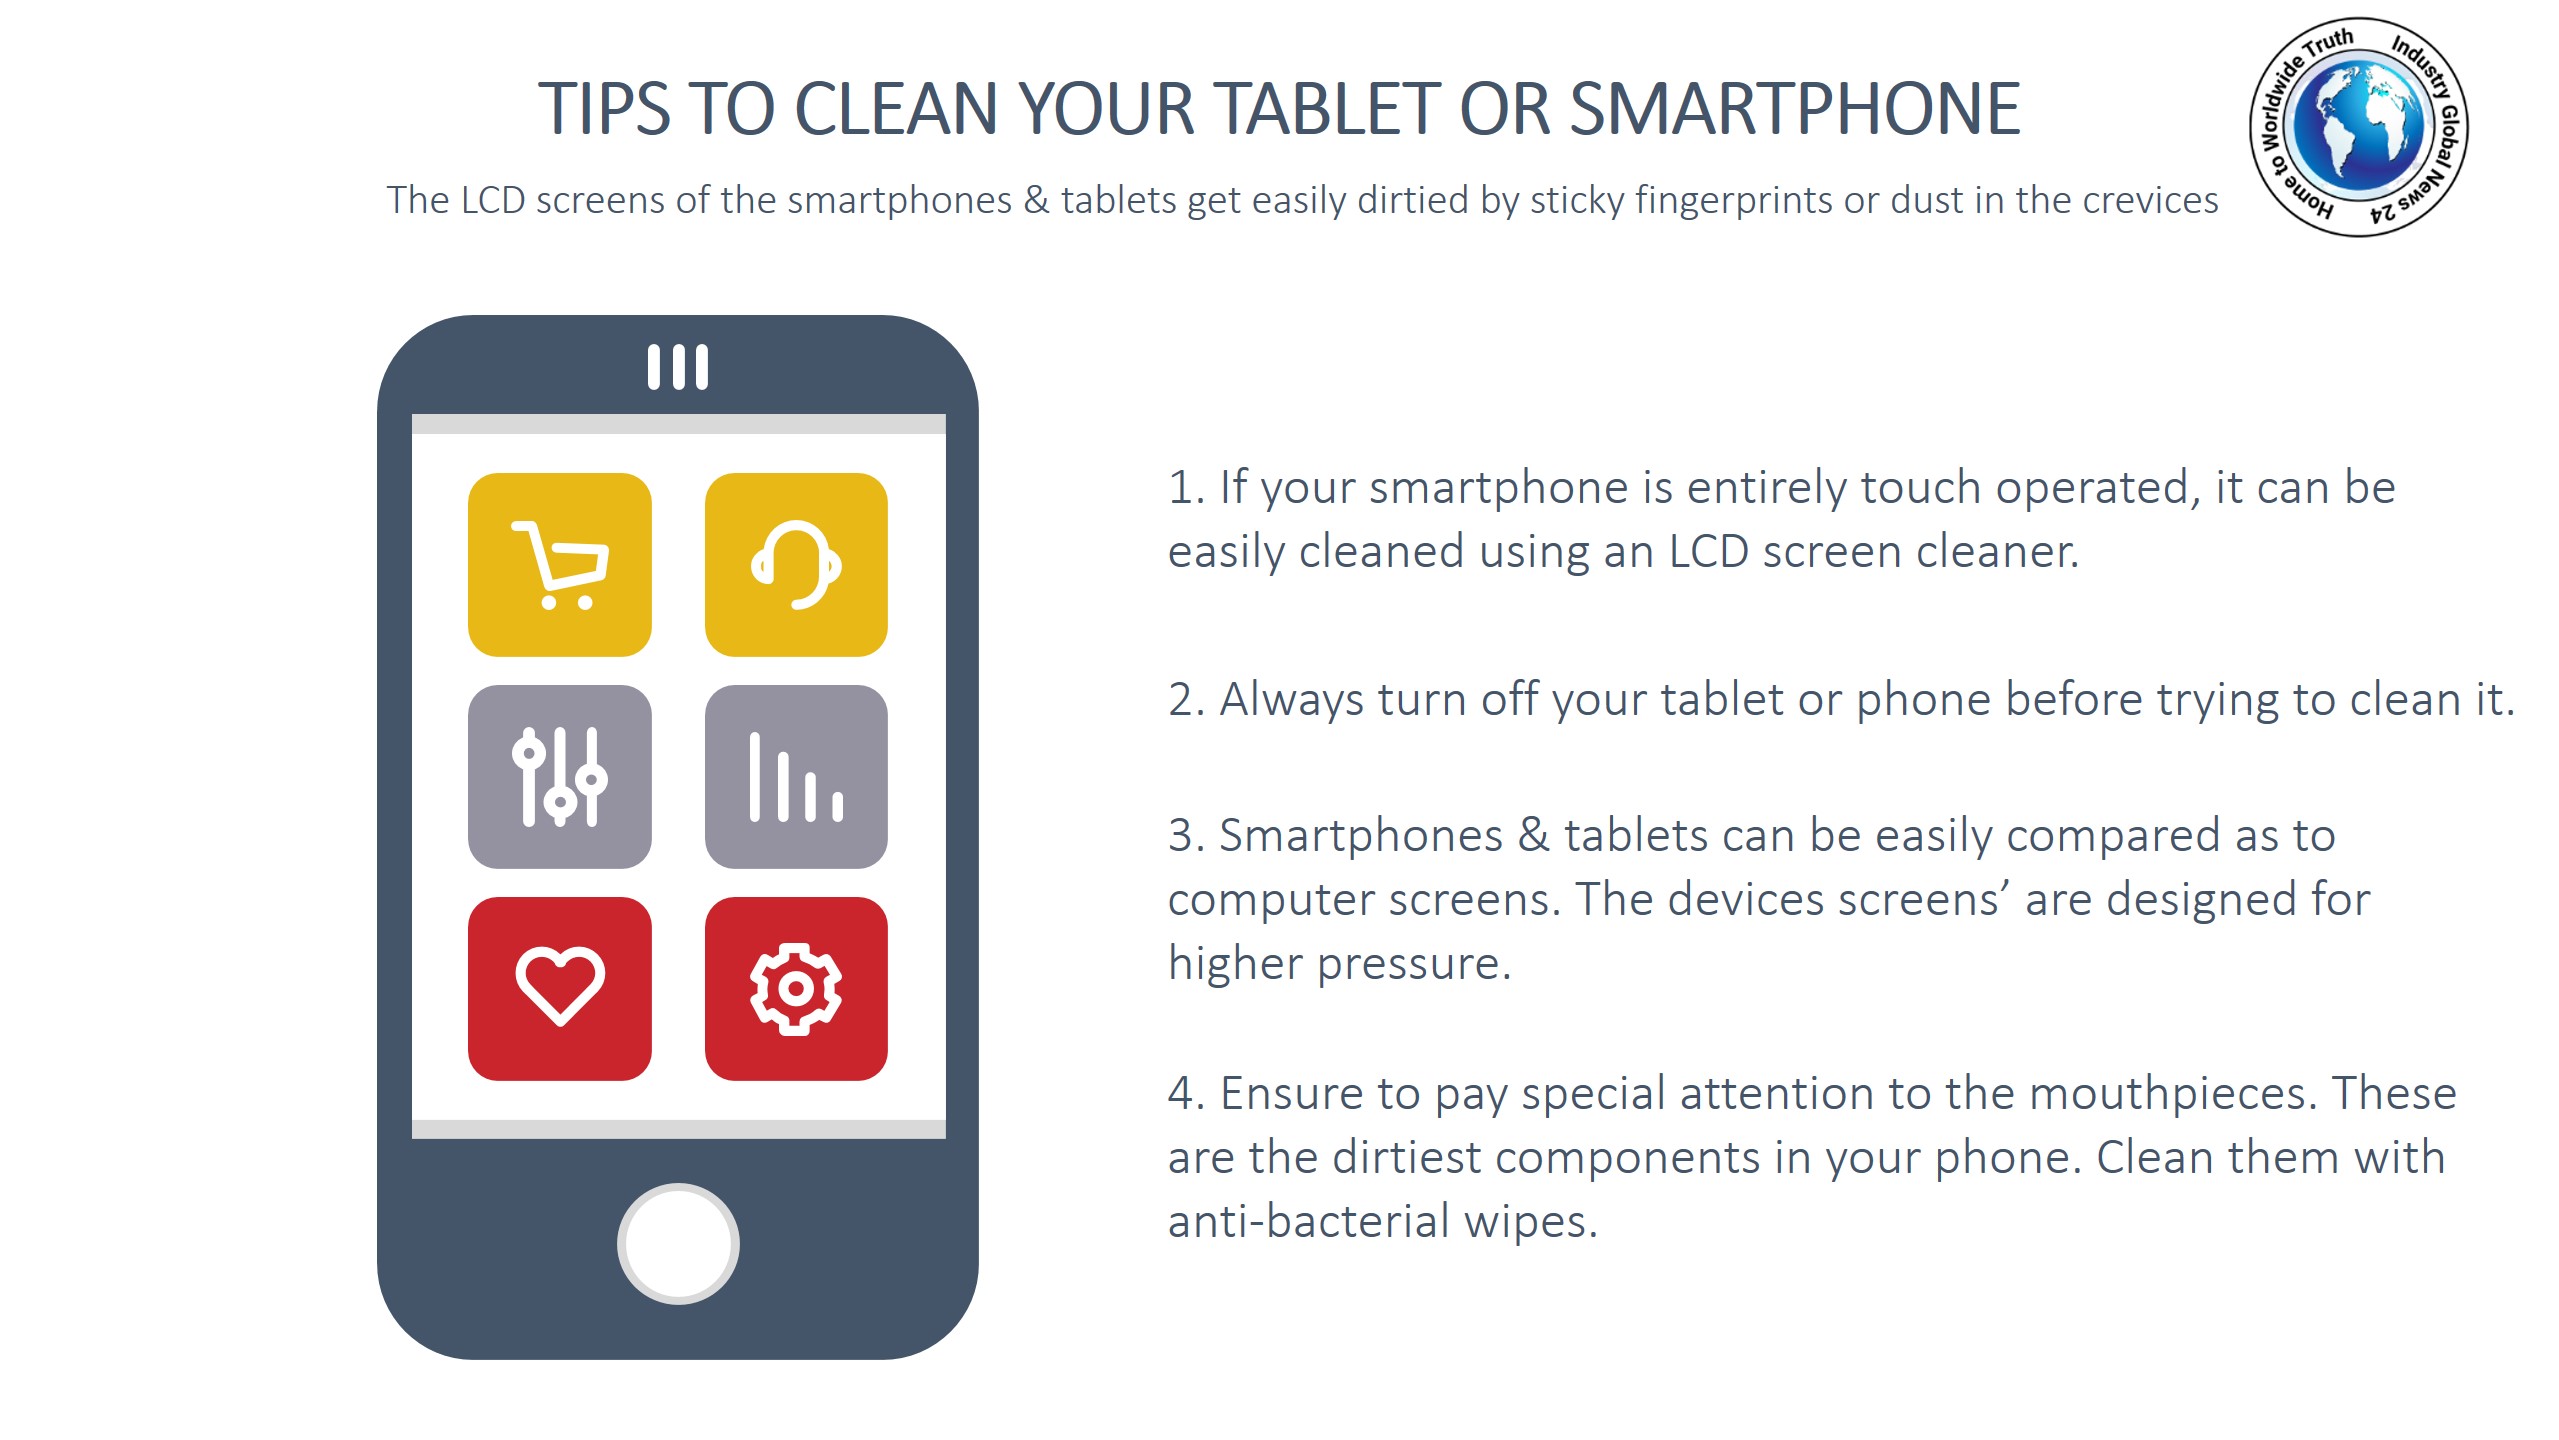 Tips to clean your tablet or smartphone